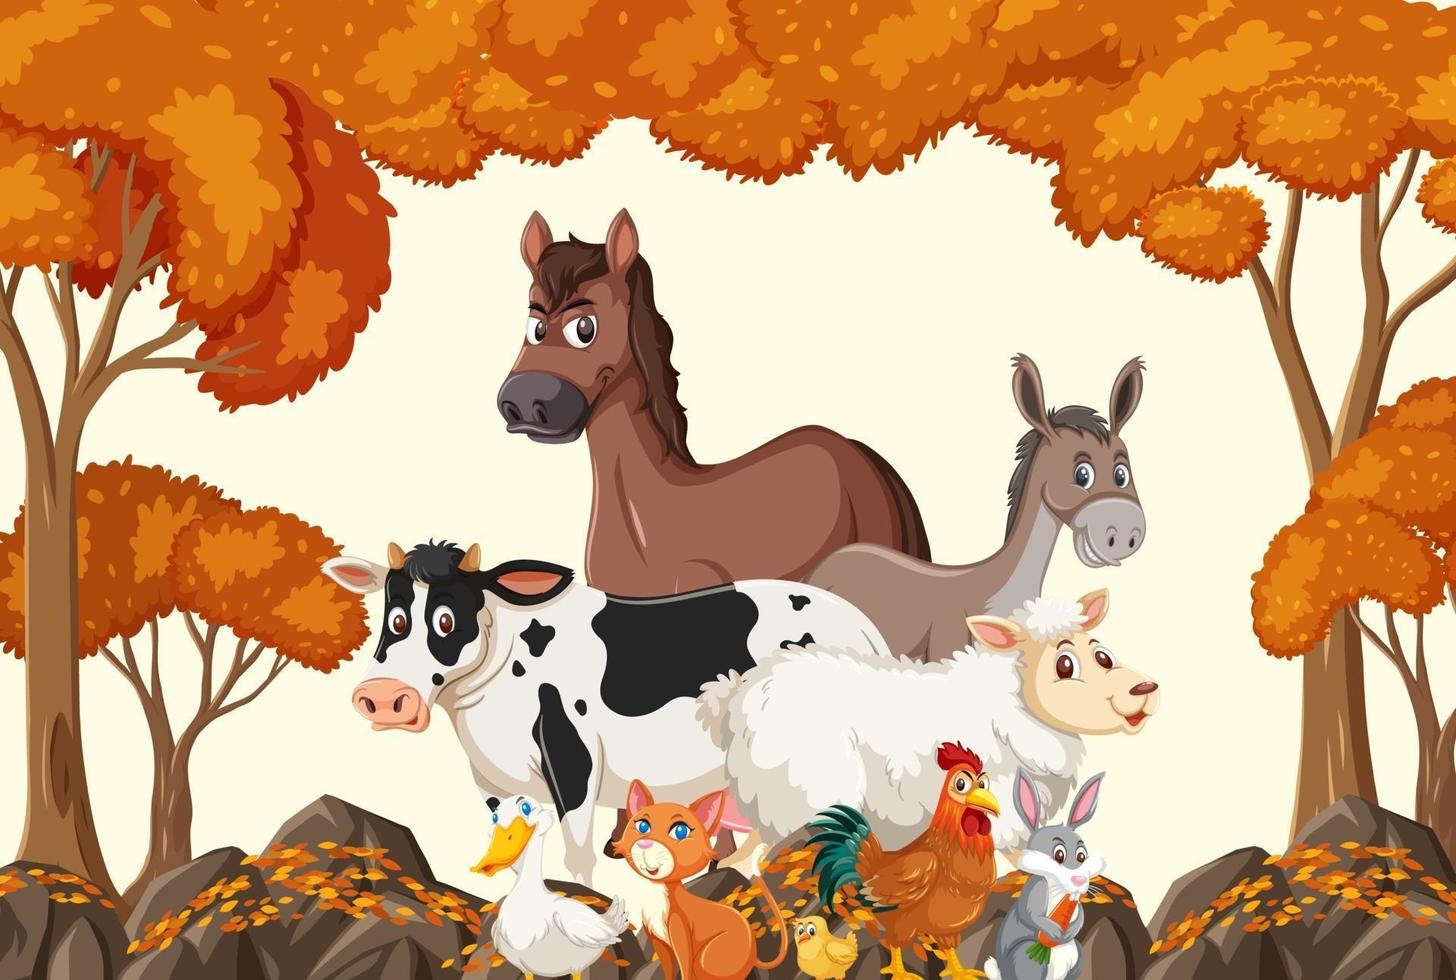 Farm animals group in the autumn forest scene vector